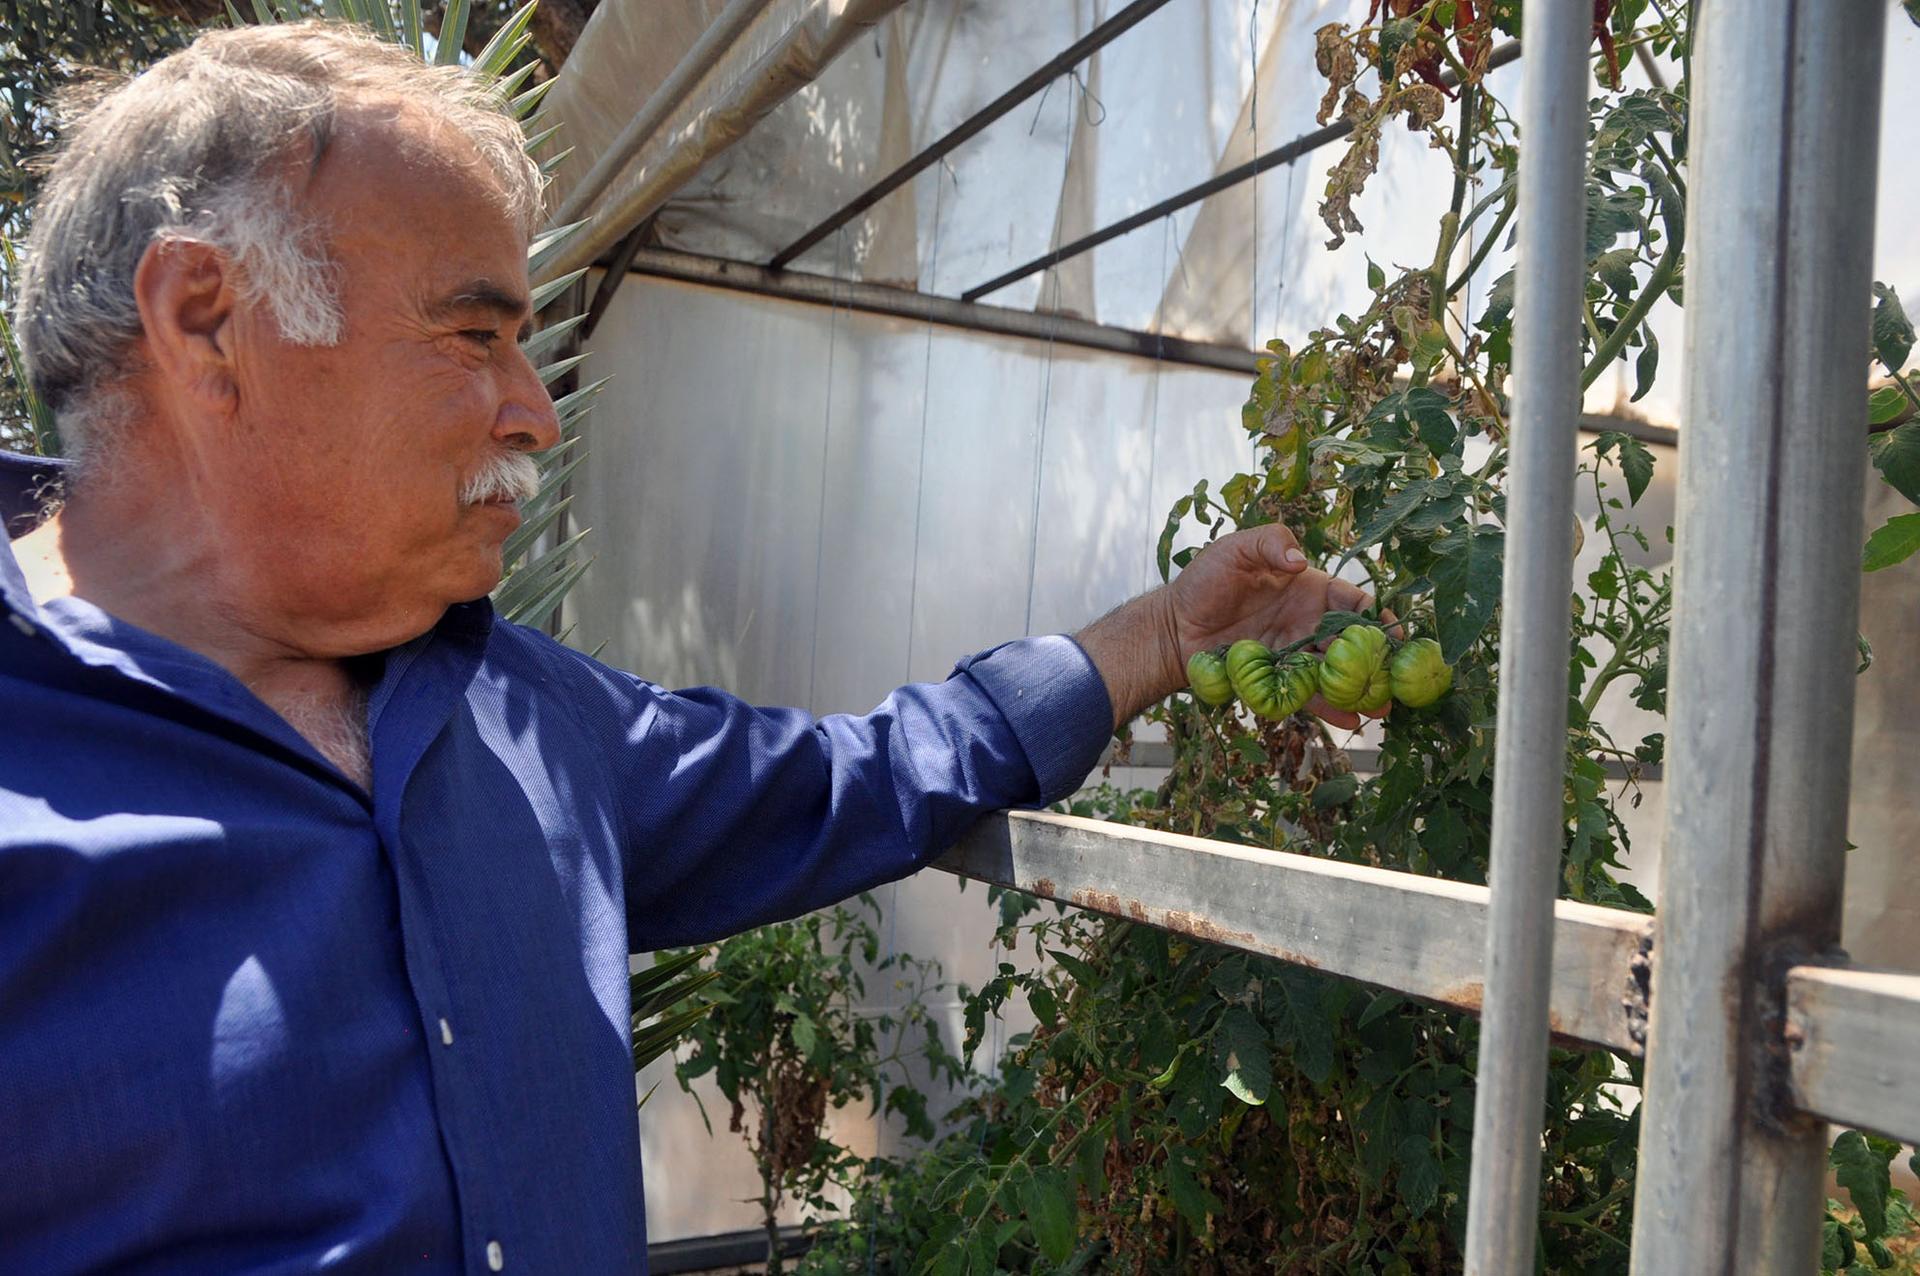 Huseyin Kara inspects an heirloom tomato variety grown in a greenhouse on his farm.